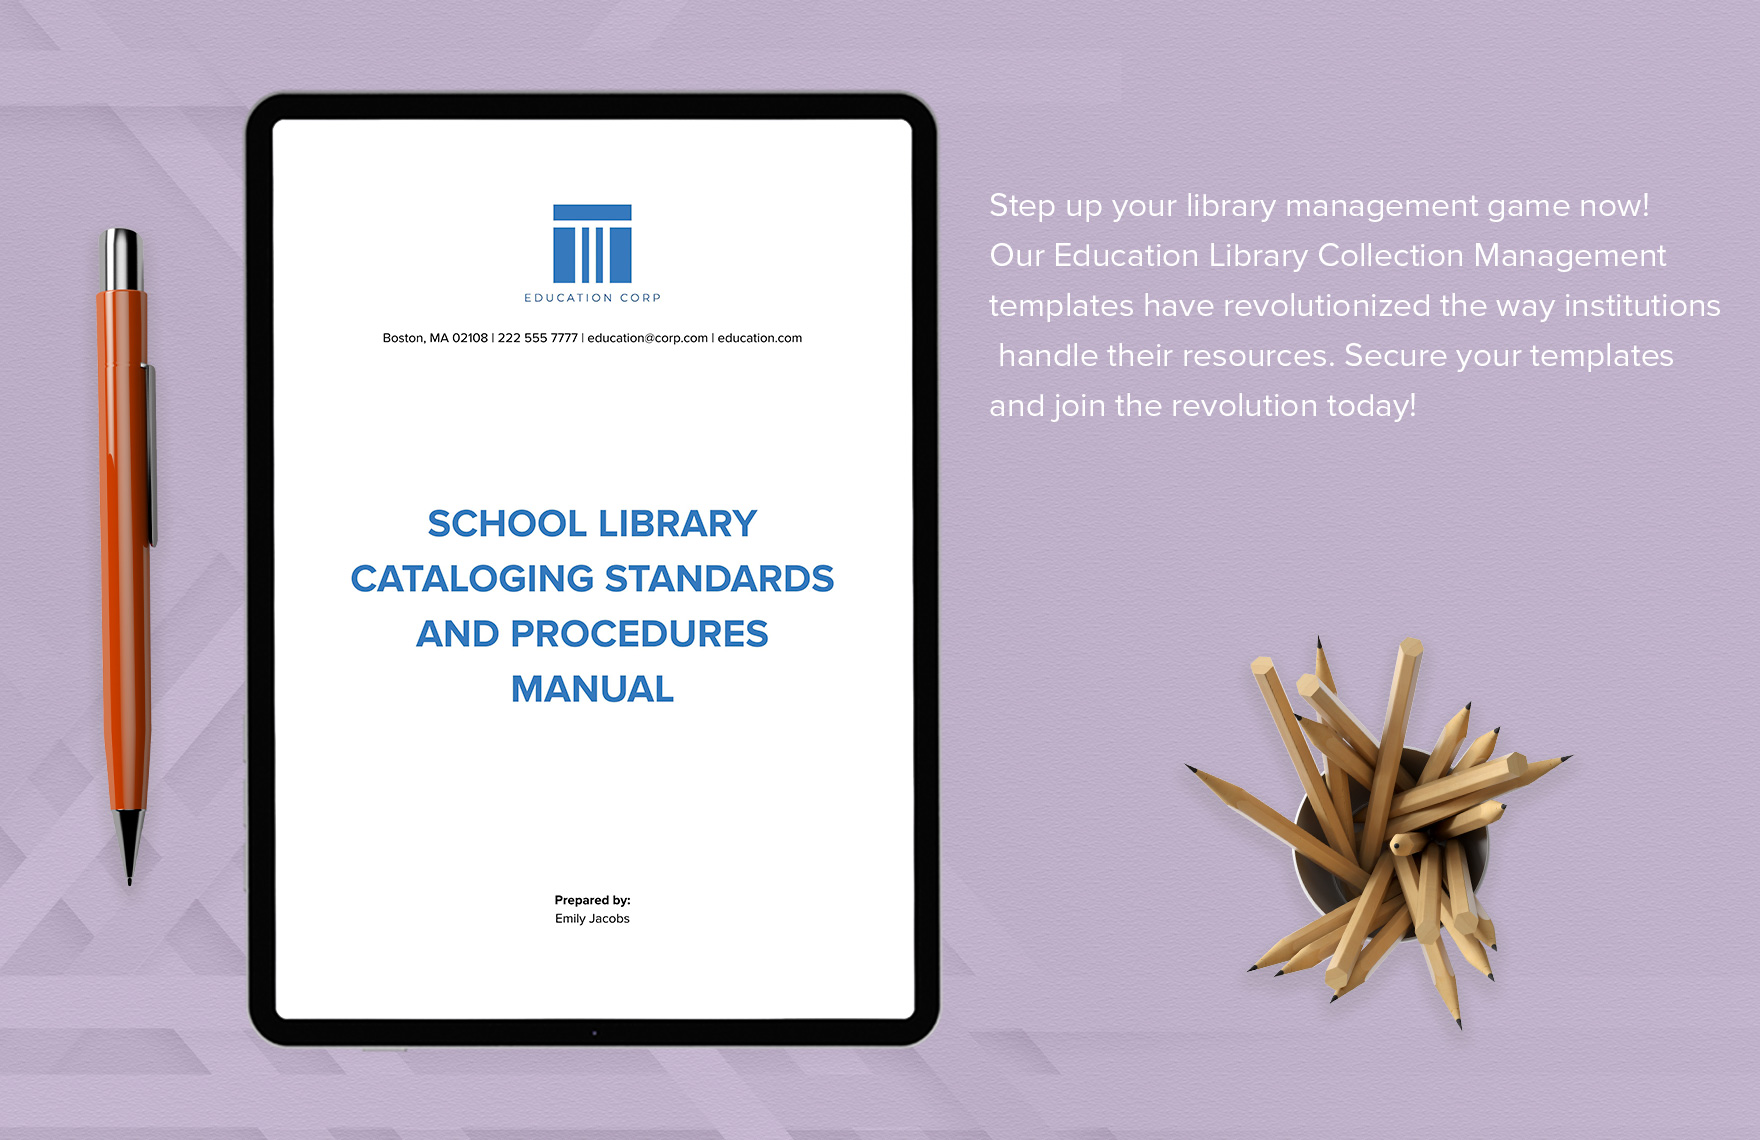 School Library Cataloging Standards and Procedures Manual Template